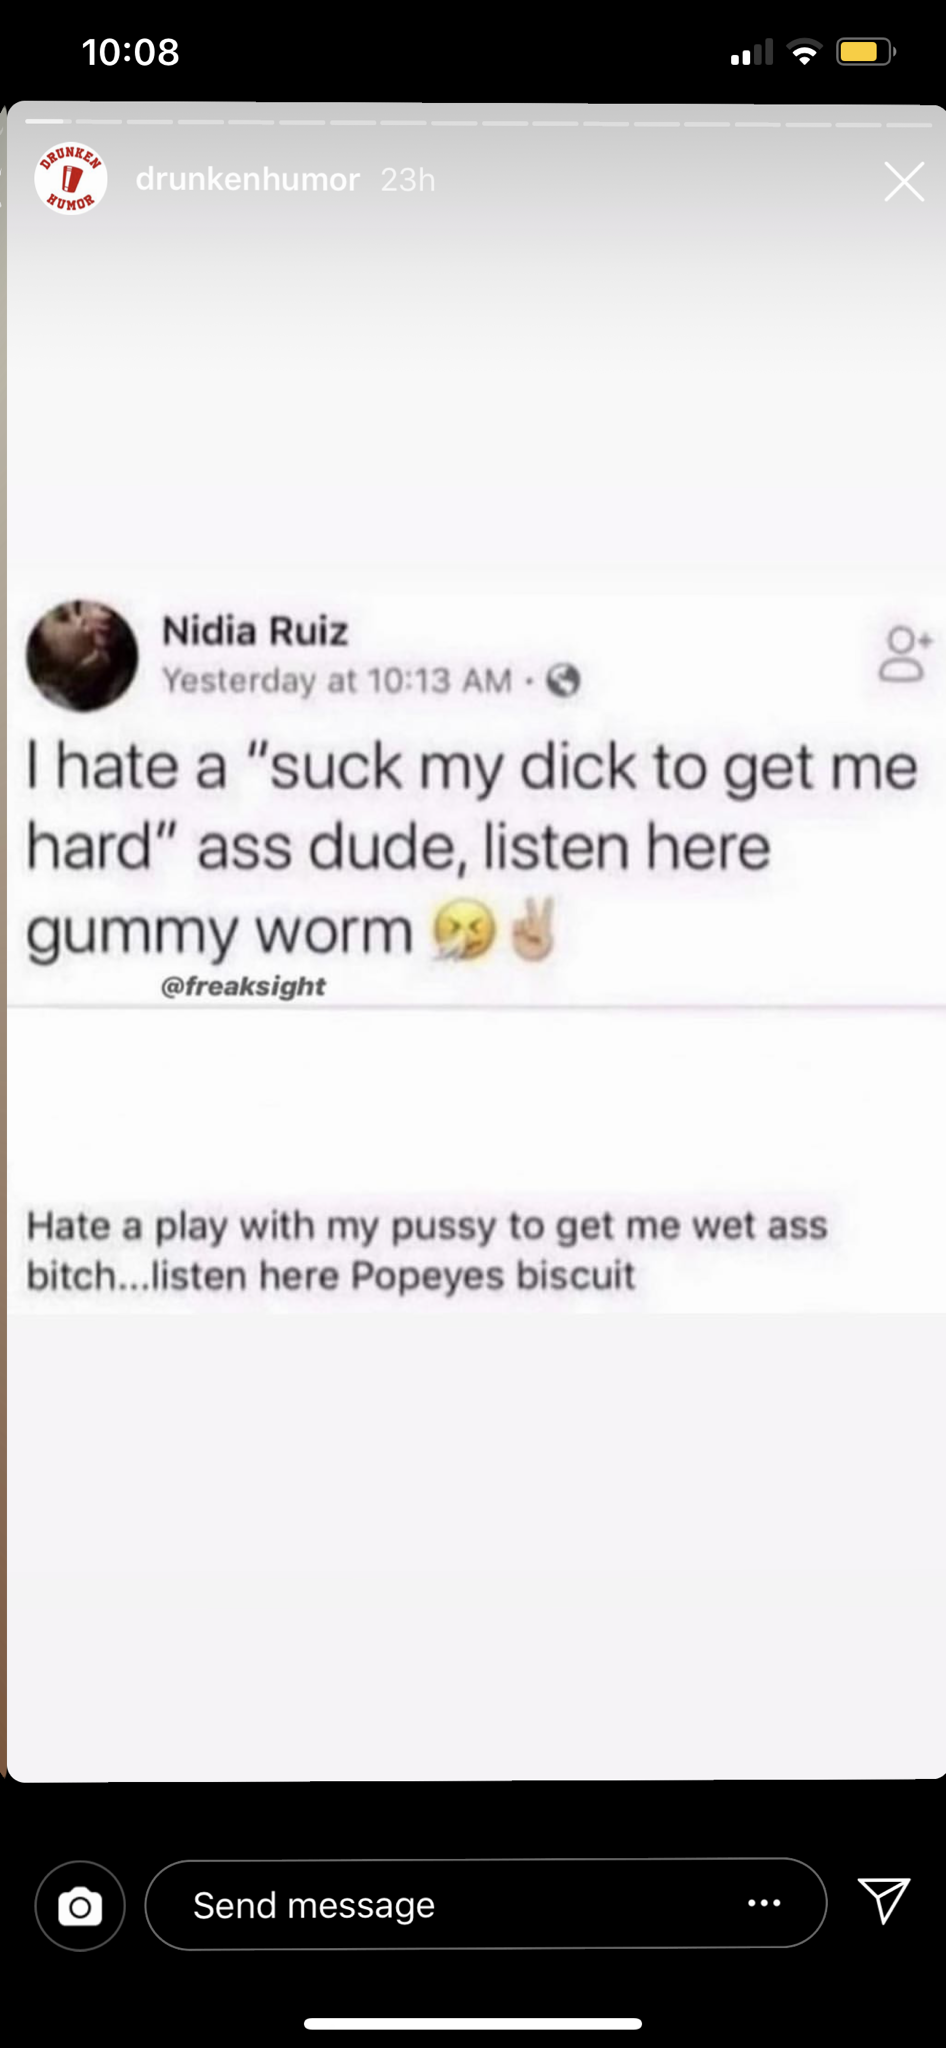 screenshot - | , Nidia Ruiz Yesterday at I hate a "suck my dick to get me hard" ass dude, listen here gummy worms freight Hate a play with my pussy to get me wet ass bitch...listen here Popeyes biscuit Send message